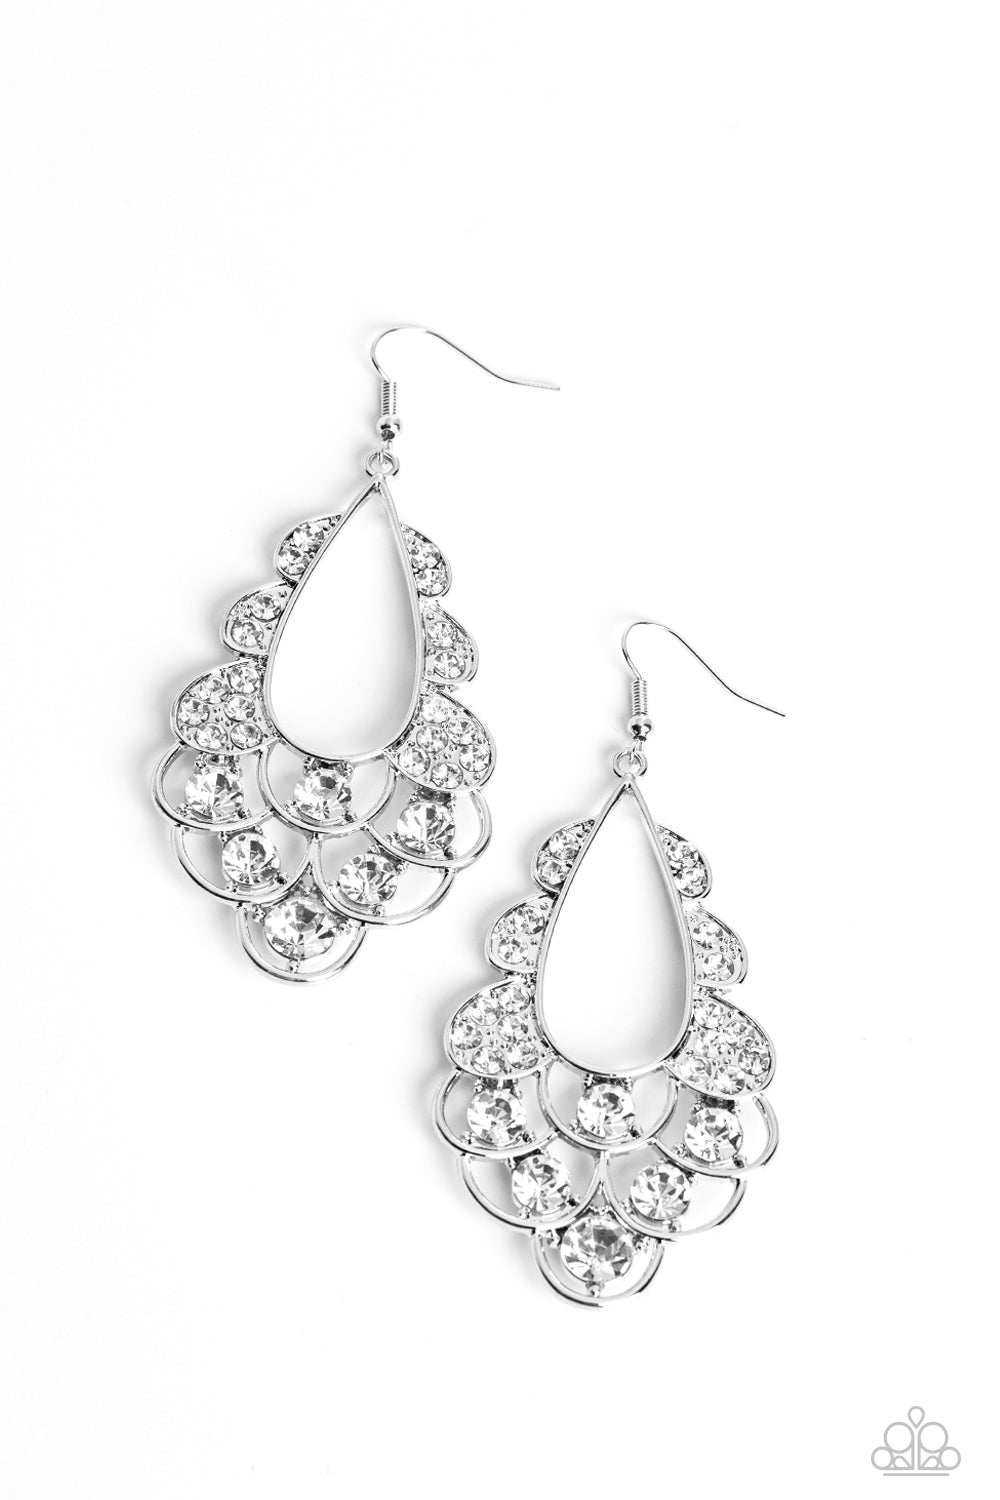 Majestic Masquerade White Earring - Paparazzi Accessories  Airy loops of high-sheen silver, dotted with glittery white faceted gems, ripple out from an airy teardrop shape. Some curls feature solitaire oversized gems, while others feature a dainty collection resulting in a timeless, incandescent teardrop chandelier below the ear. Earring attaches to a standard fishhook fitting.  Sold as one pair of earrings.